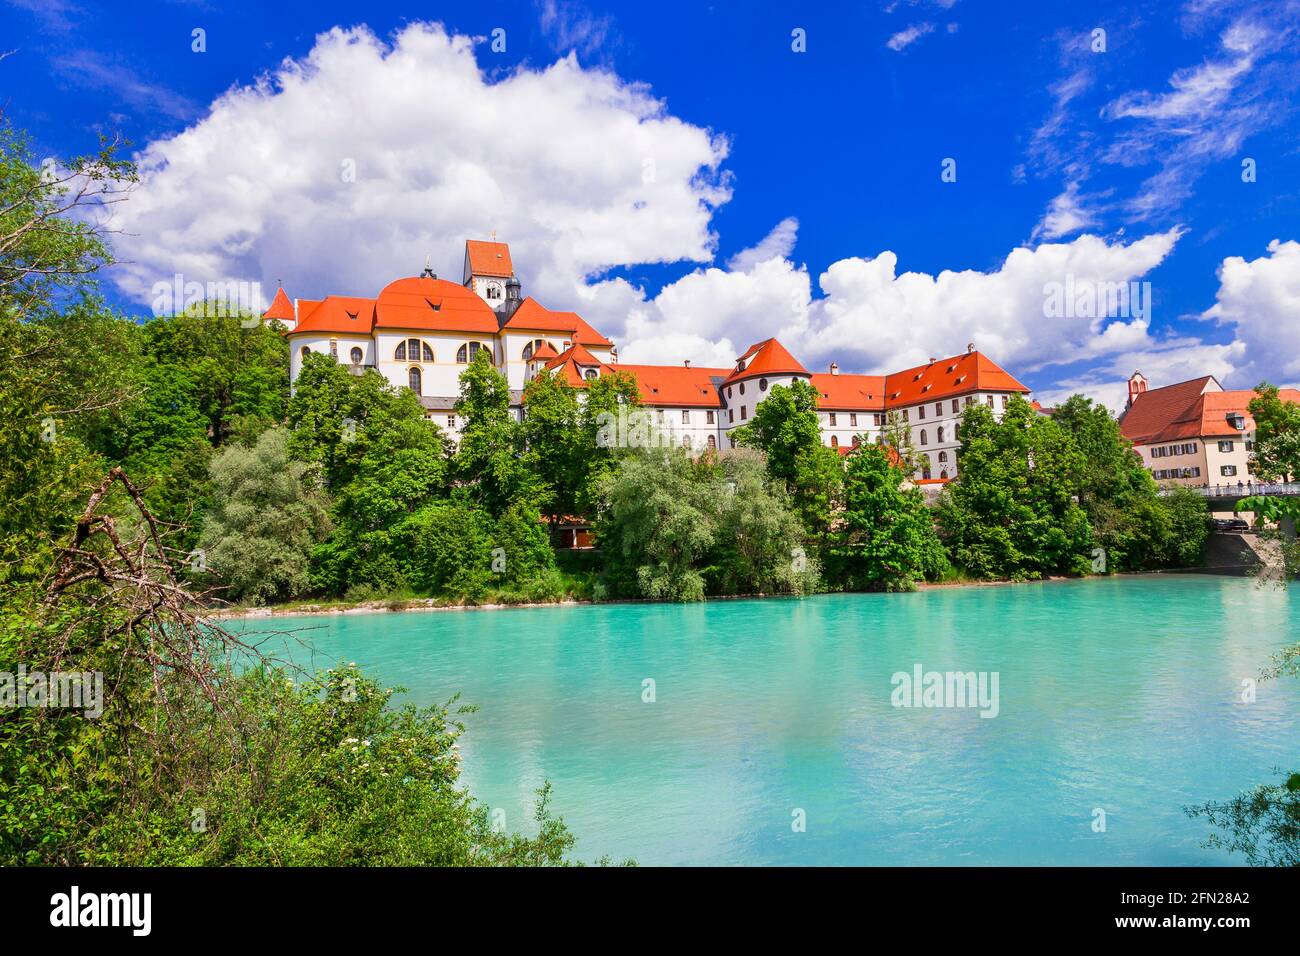 Famous medieval castles of Europe - pictorial Fussen in Bavaria . Germany travel and historic landmarks Stock Photo